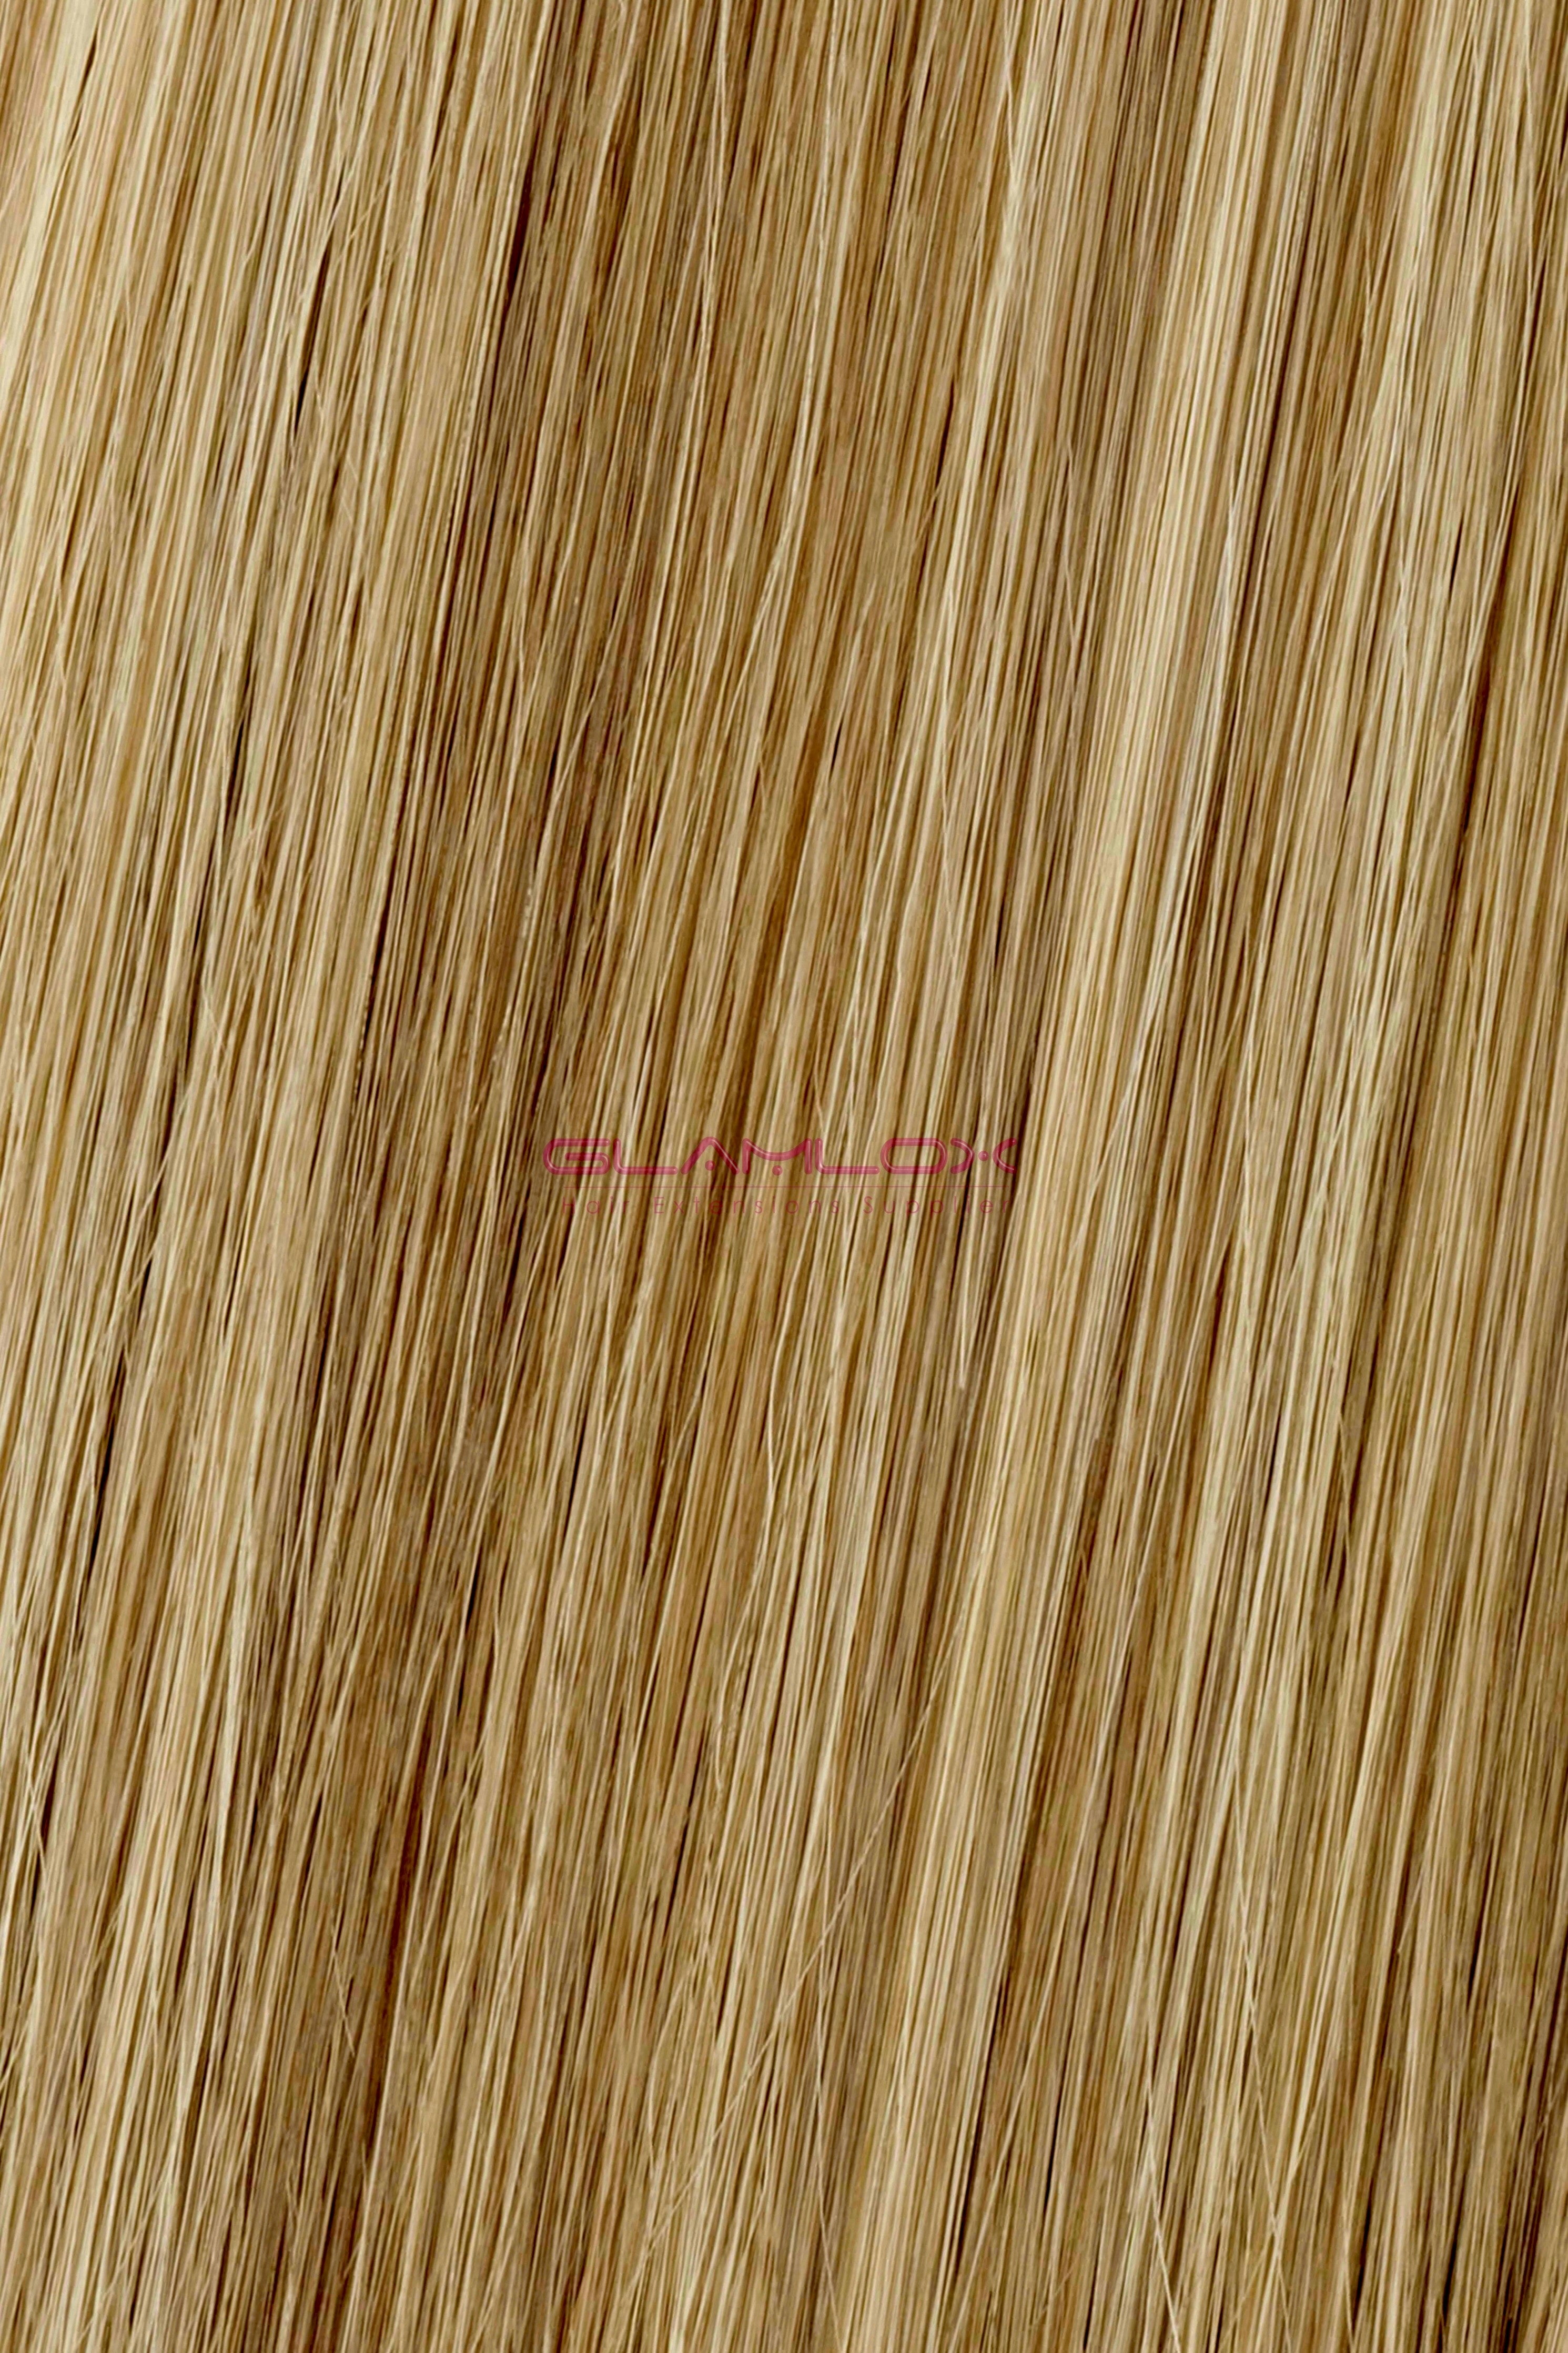 26" Nano Ring Hair Extensions - Russian Mongolian Double Drawn Remy Human Hair  - 20 Strands